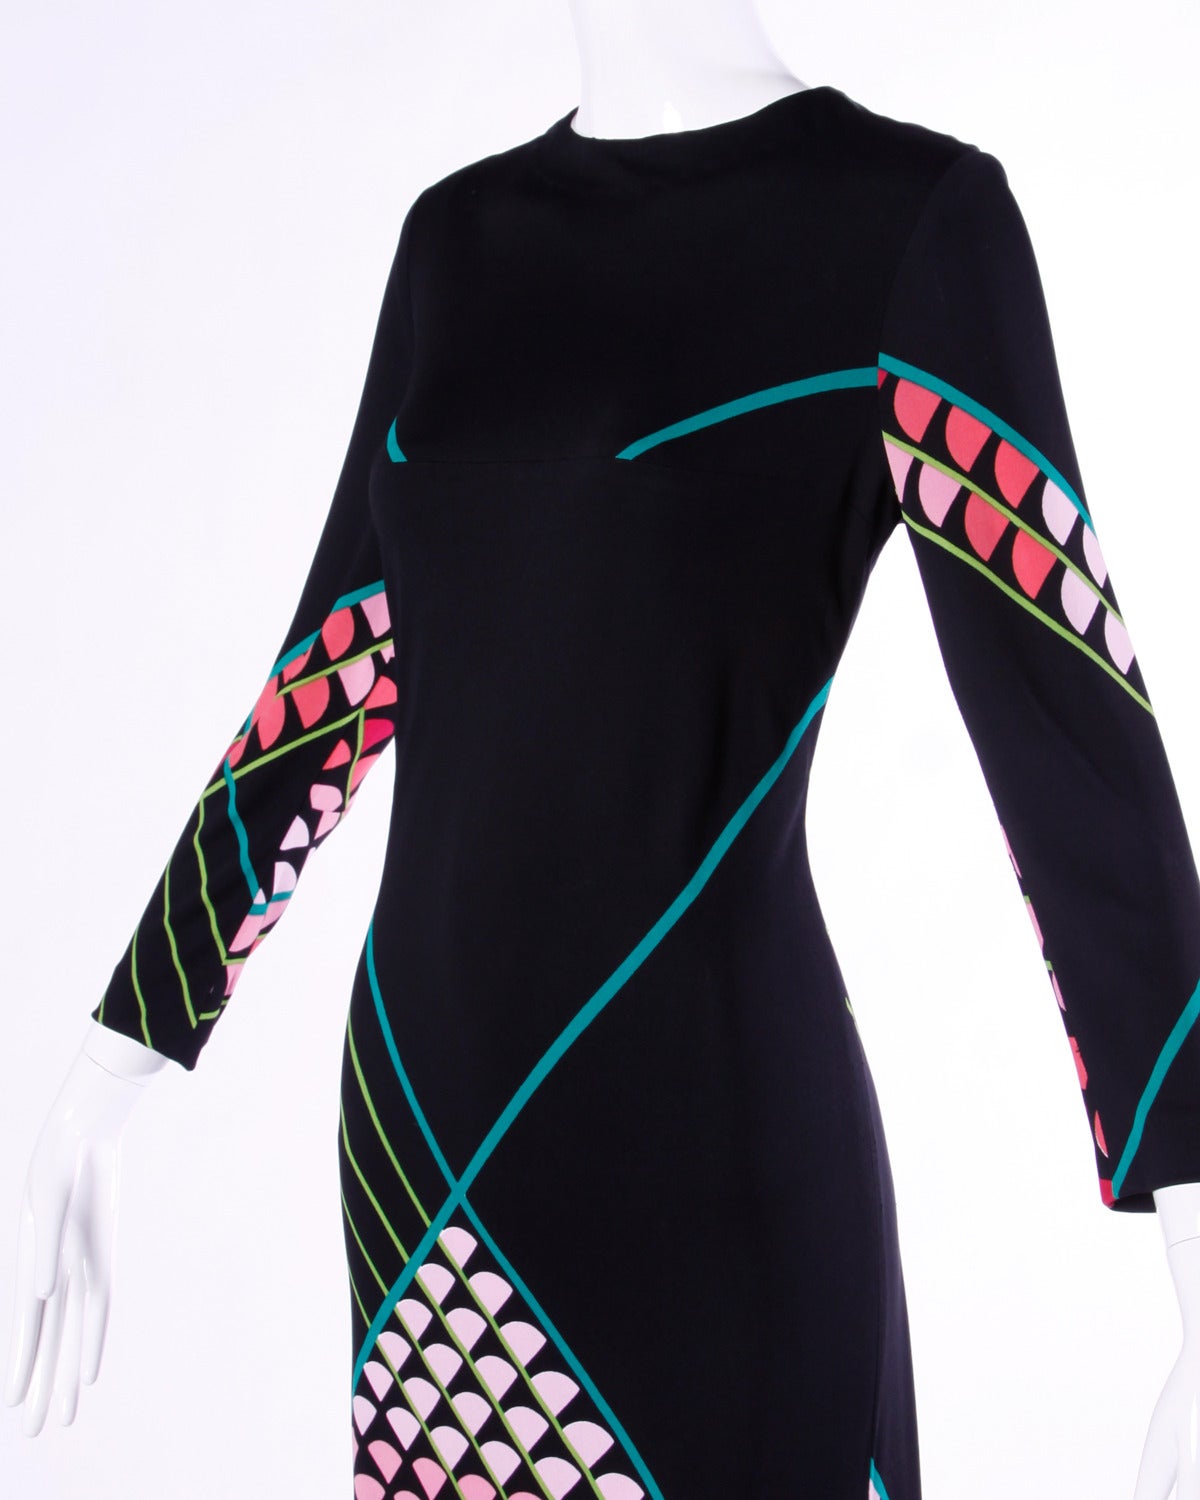 Gorgeous jersey knit maxi dress with a colorful op art design by Lanvin. Rare black label.

Details:

Unlined
Back Zip and Hook Closure
Estimated Size: Small
Color: Black/ Pink/ Green
Fabric: Jersey (Feels like Silk)
Label: